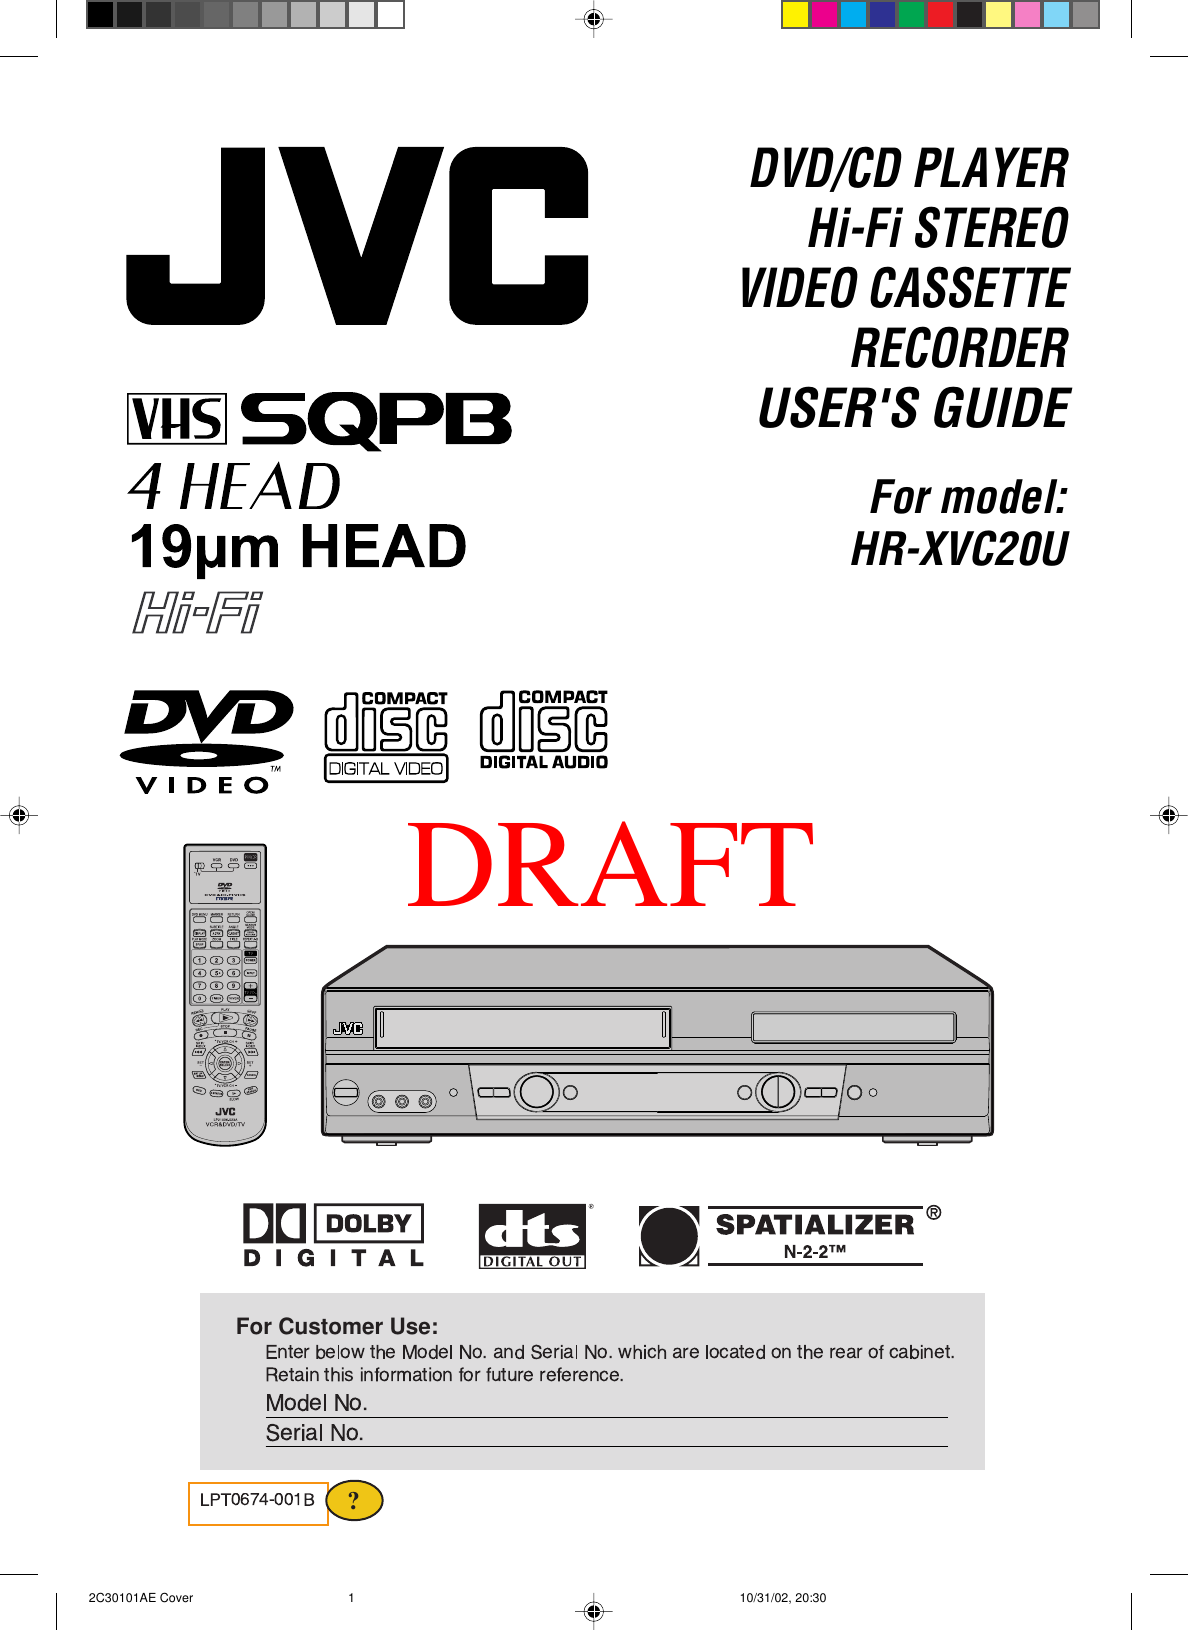 For model:HR-XVC20UDVD/CD PLAYERHi-Fi STEREOVIDEO CASSETTERECORDERUSER&apos;S GUIDEFor Customer Use:? 2C30101AE Cover 10/31/02, 20:301DRAFT